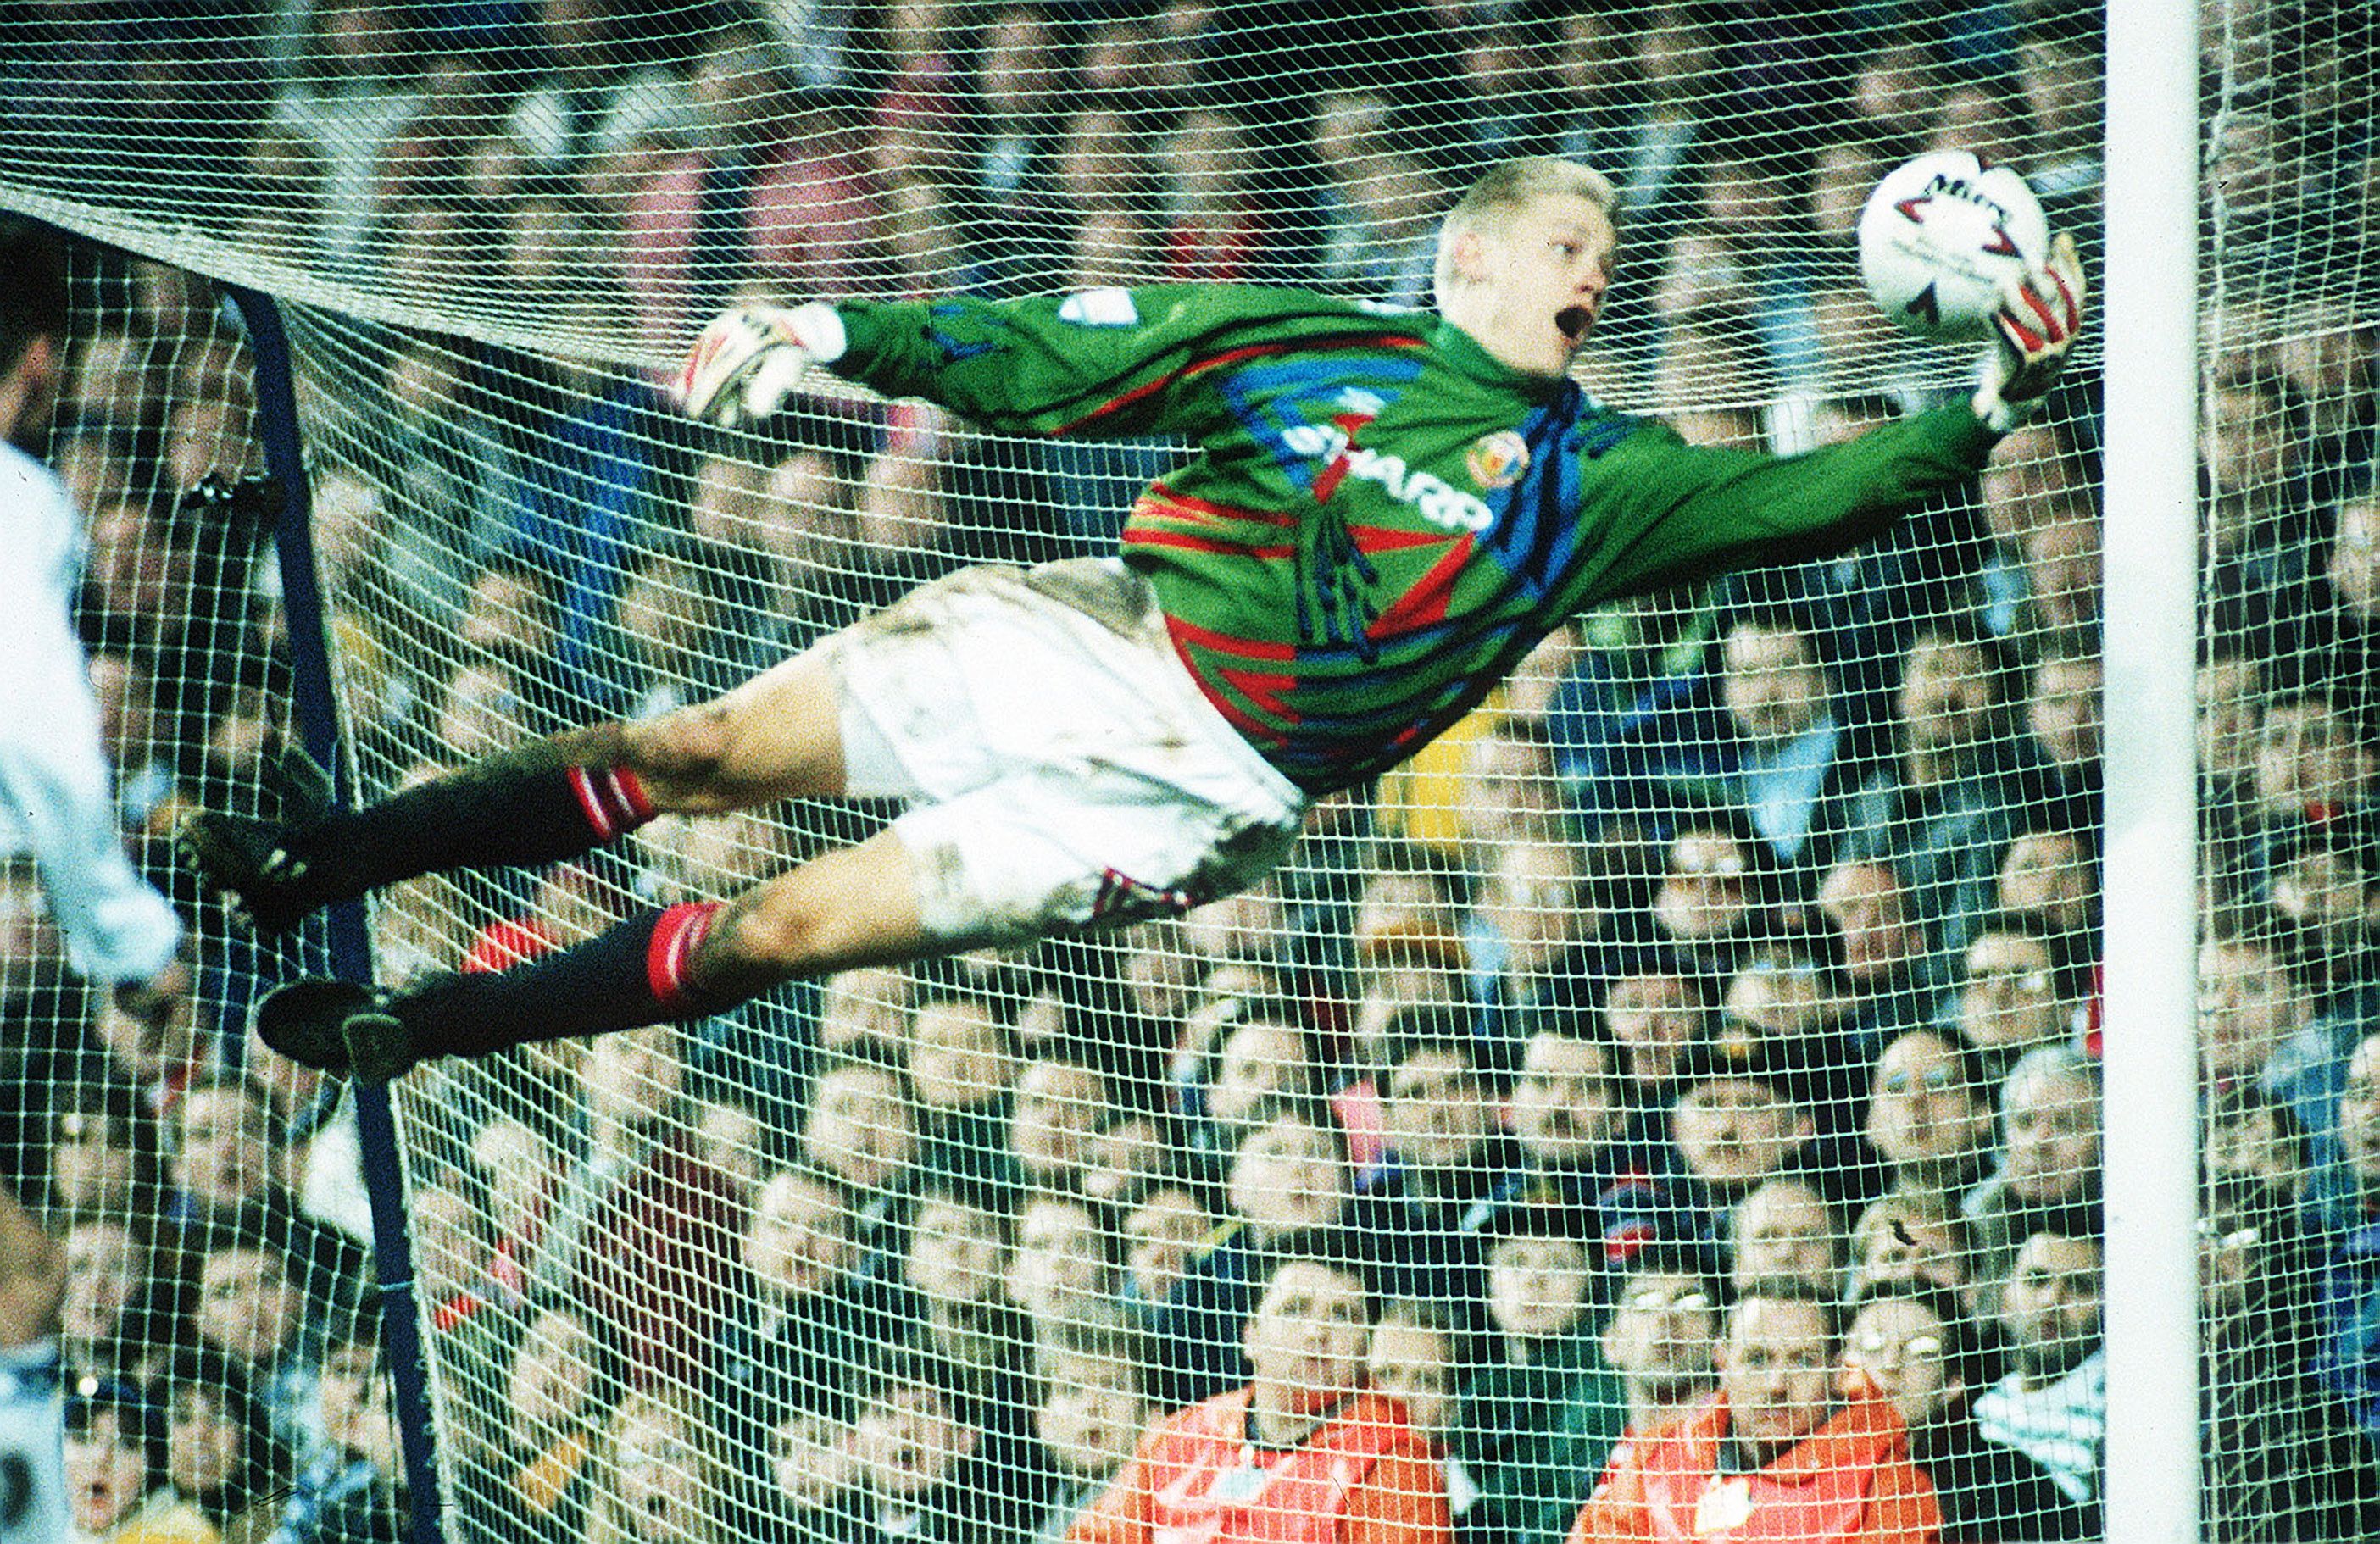 Tottenham Hotspur v Manchester United Season 92/93 Mandatory Credit : Action Images / David Jacobs United's Peter Schmeichel makes a spectacular save